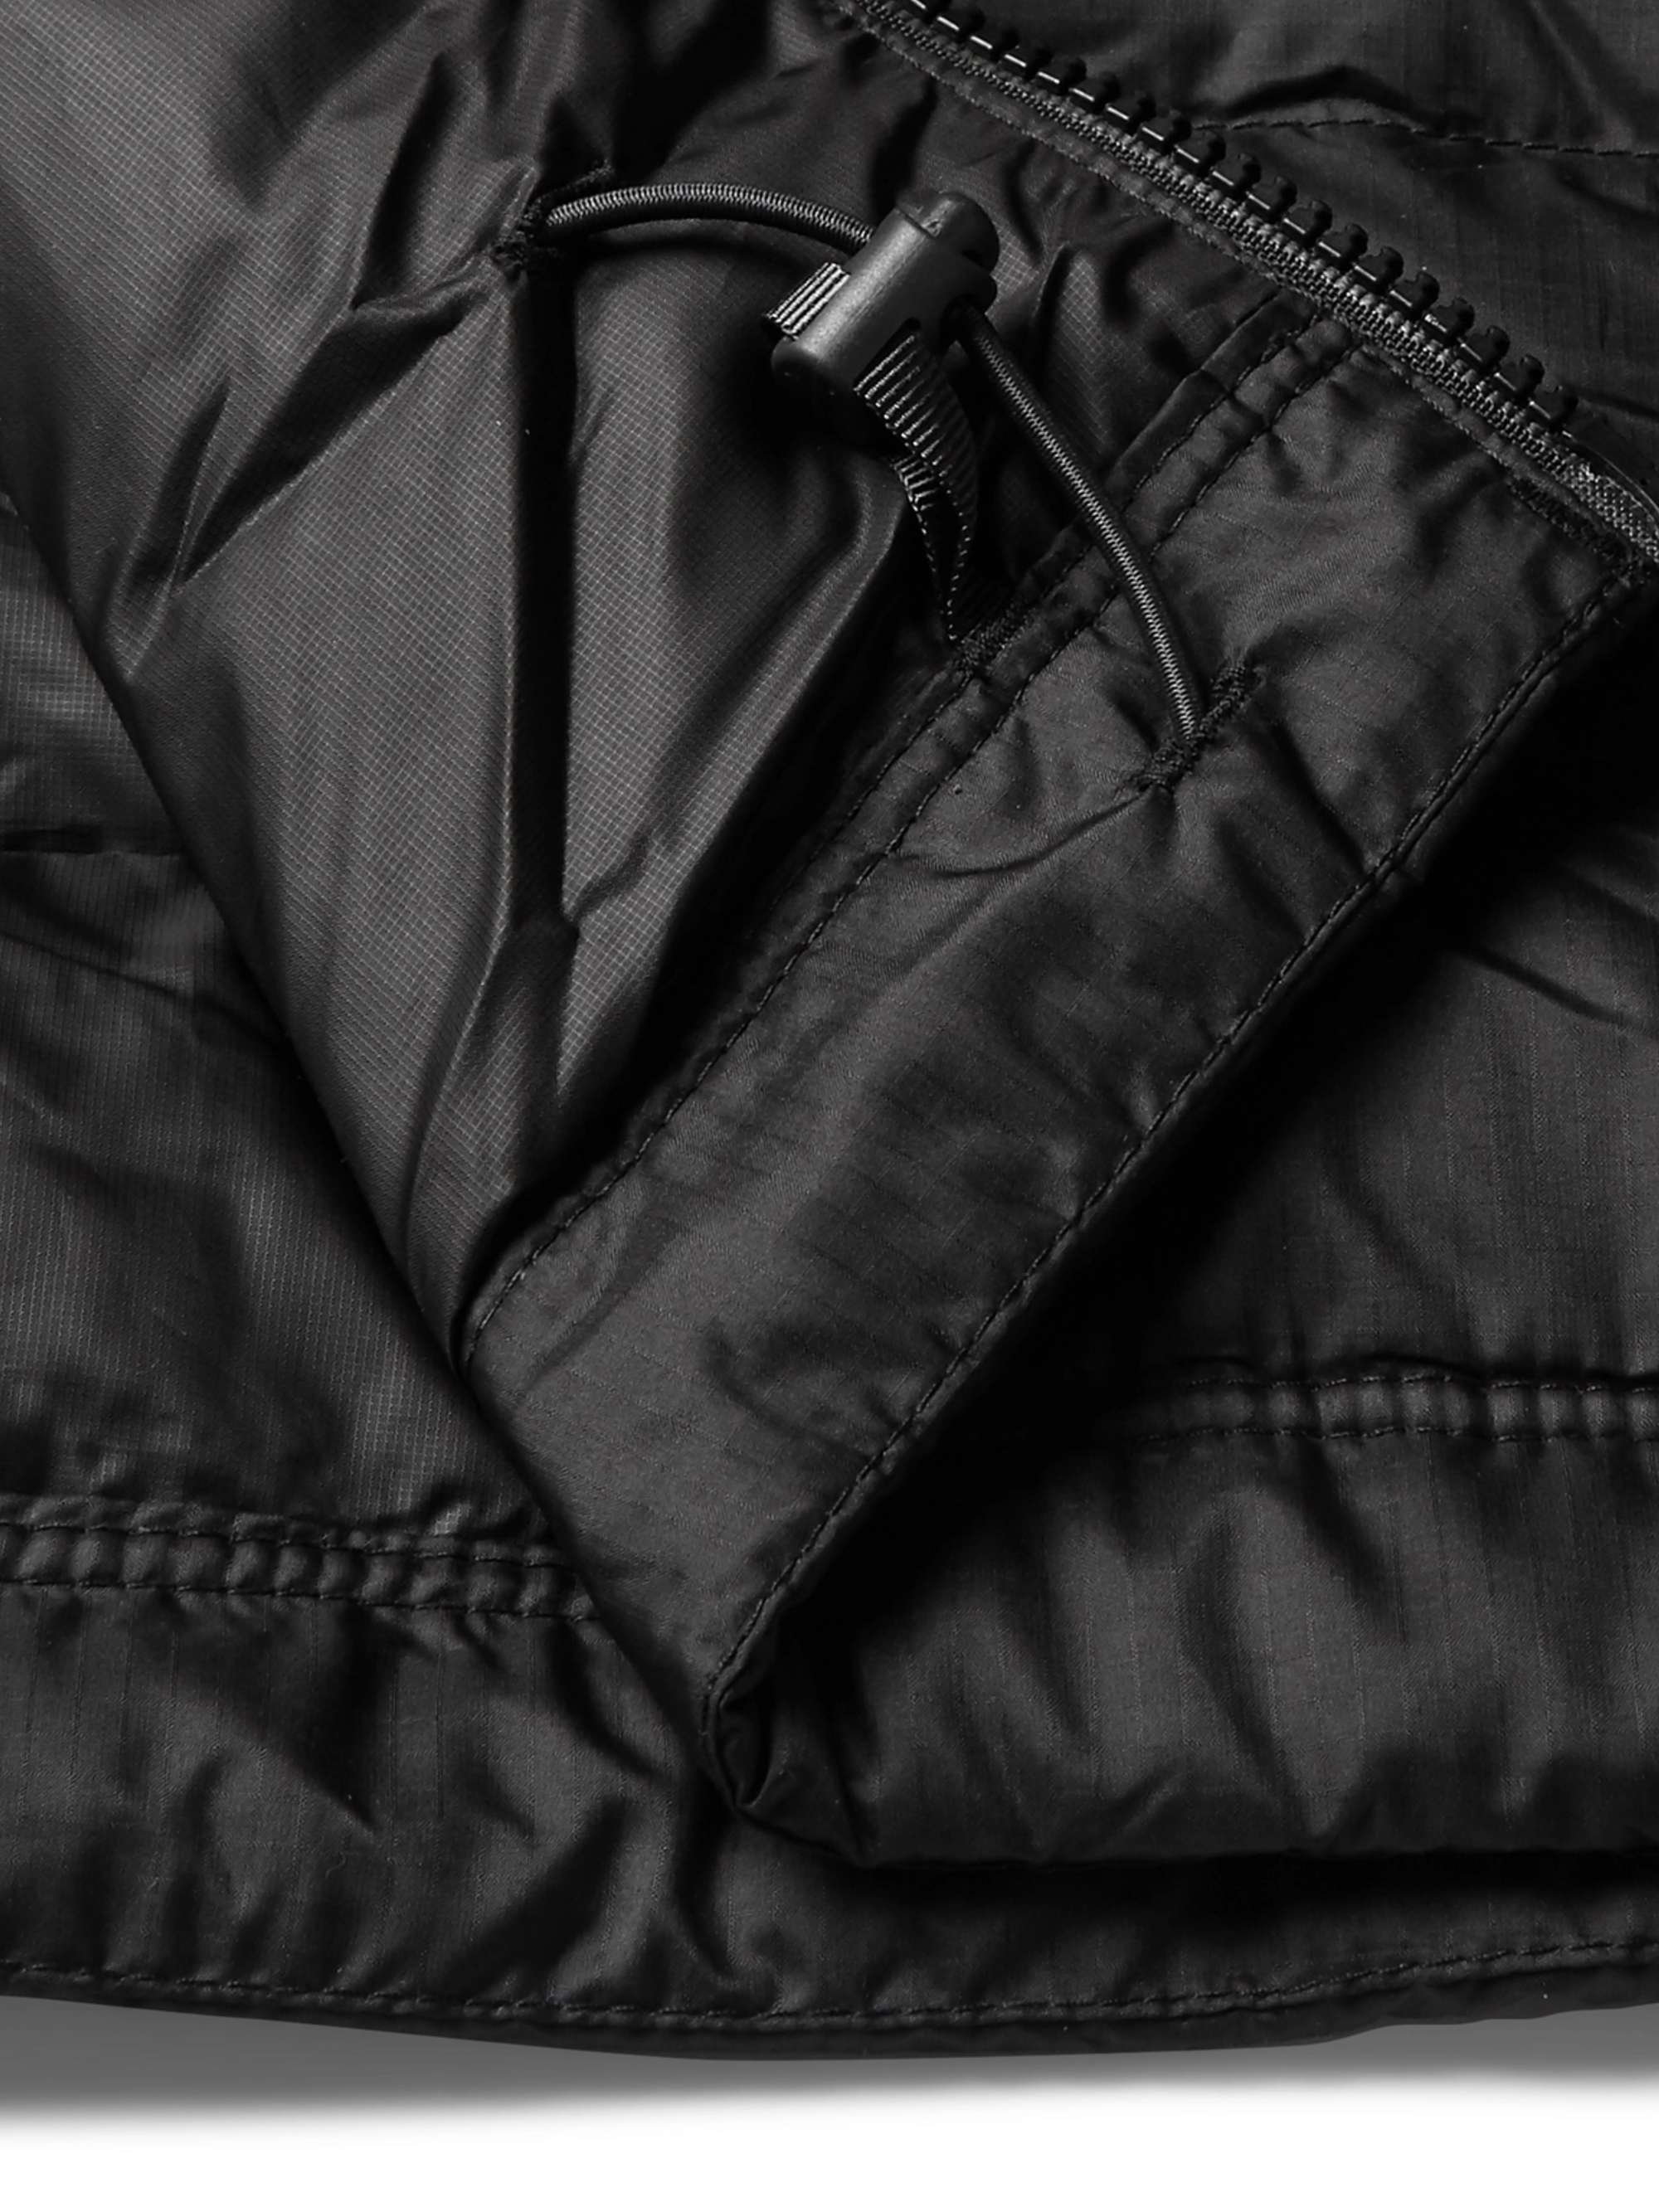 PATAGONIA Quilted DWR-Coated Ripstop Hooded Down Jacket